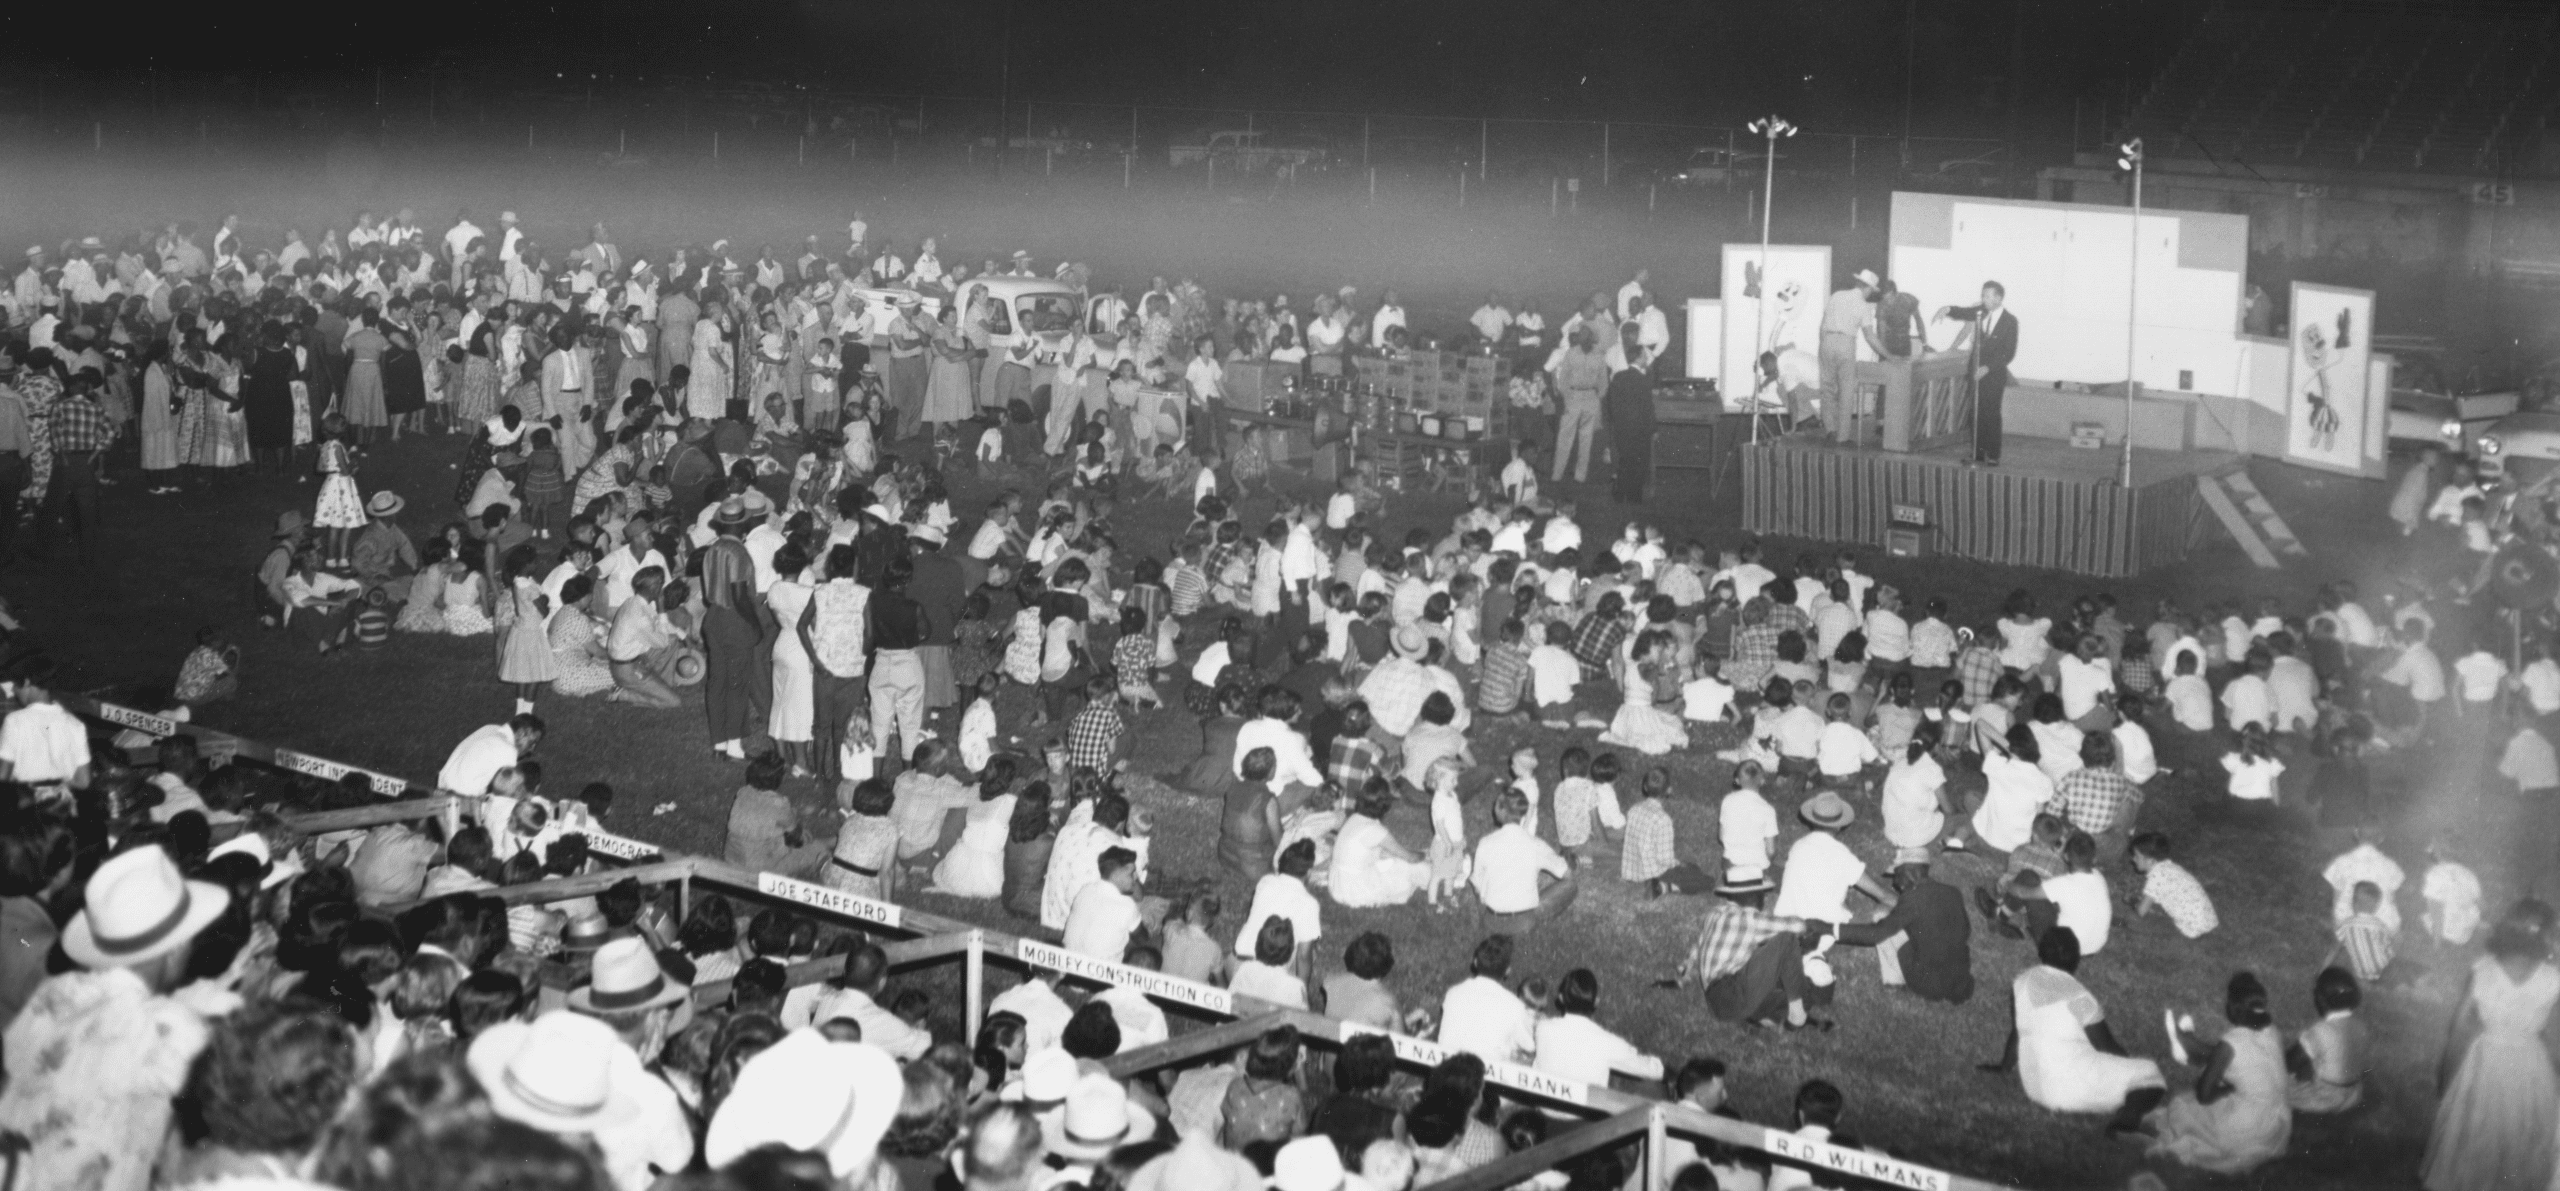 1950’s – Farmer’s Day goes into the night